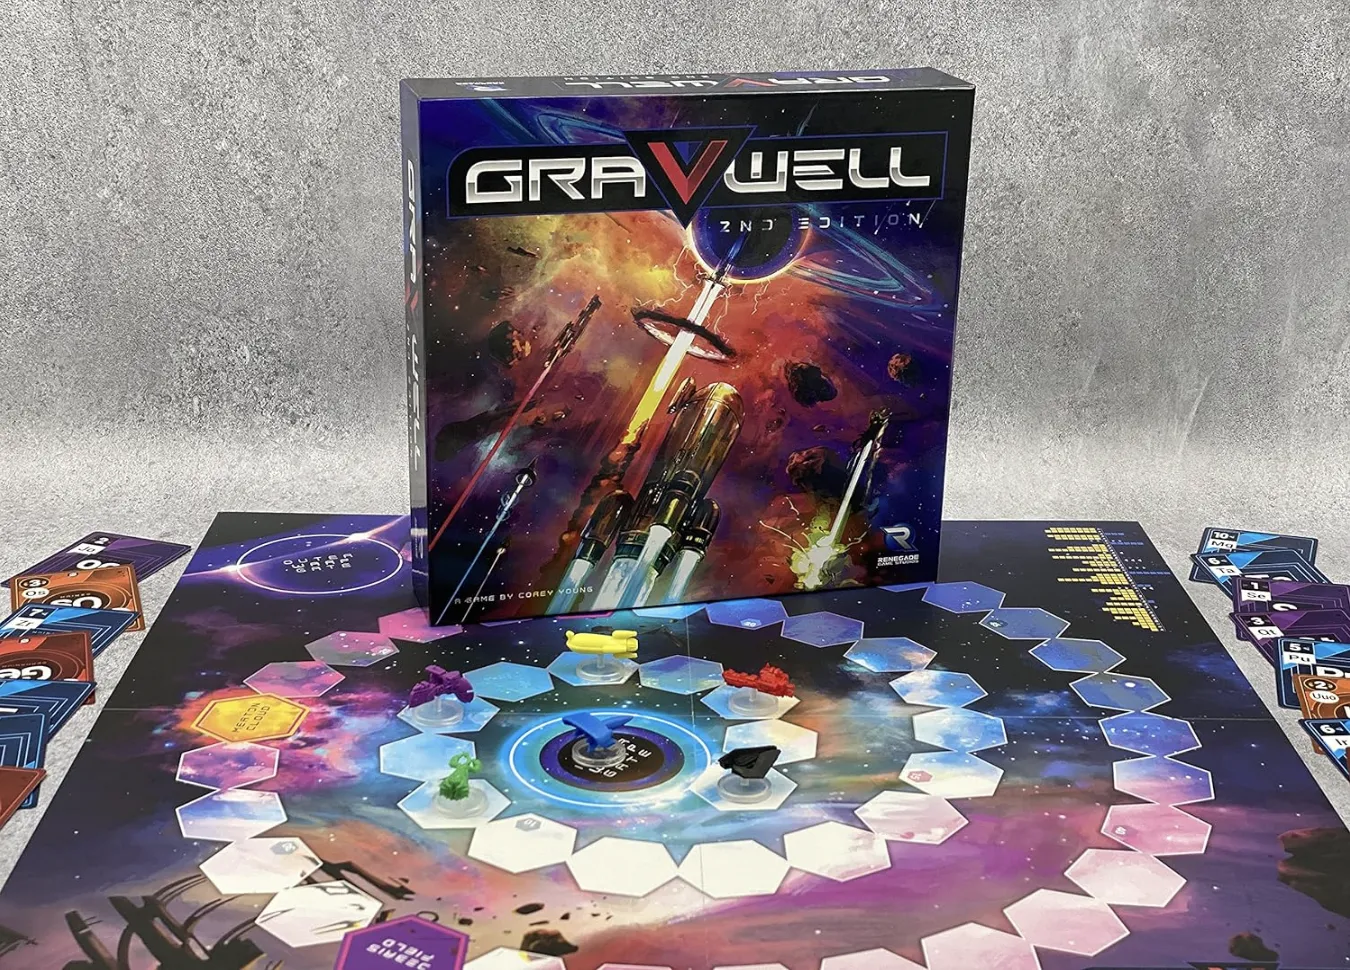 Gravwell second edition game box on top of board